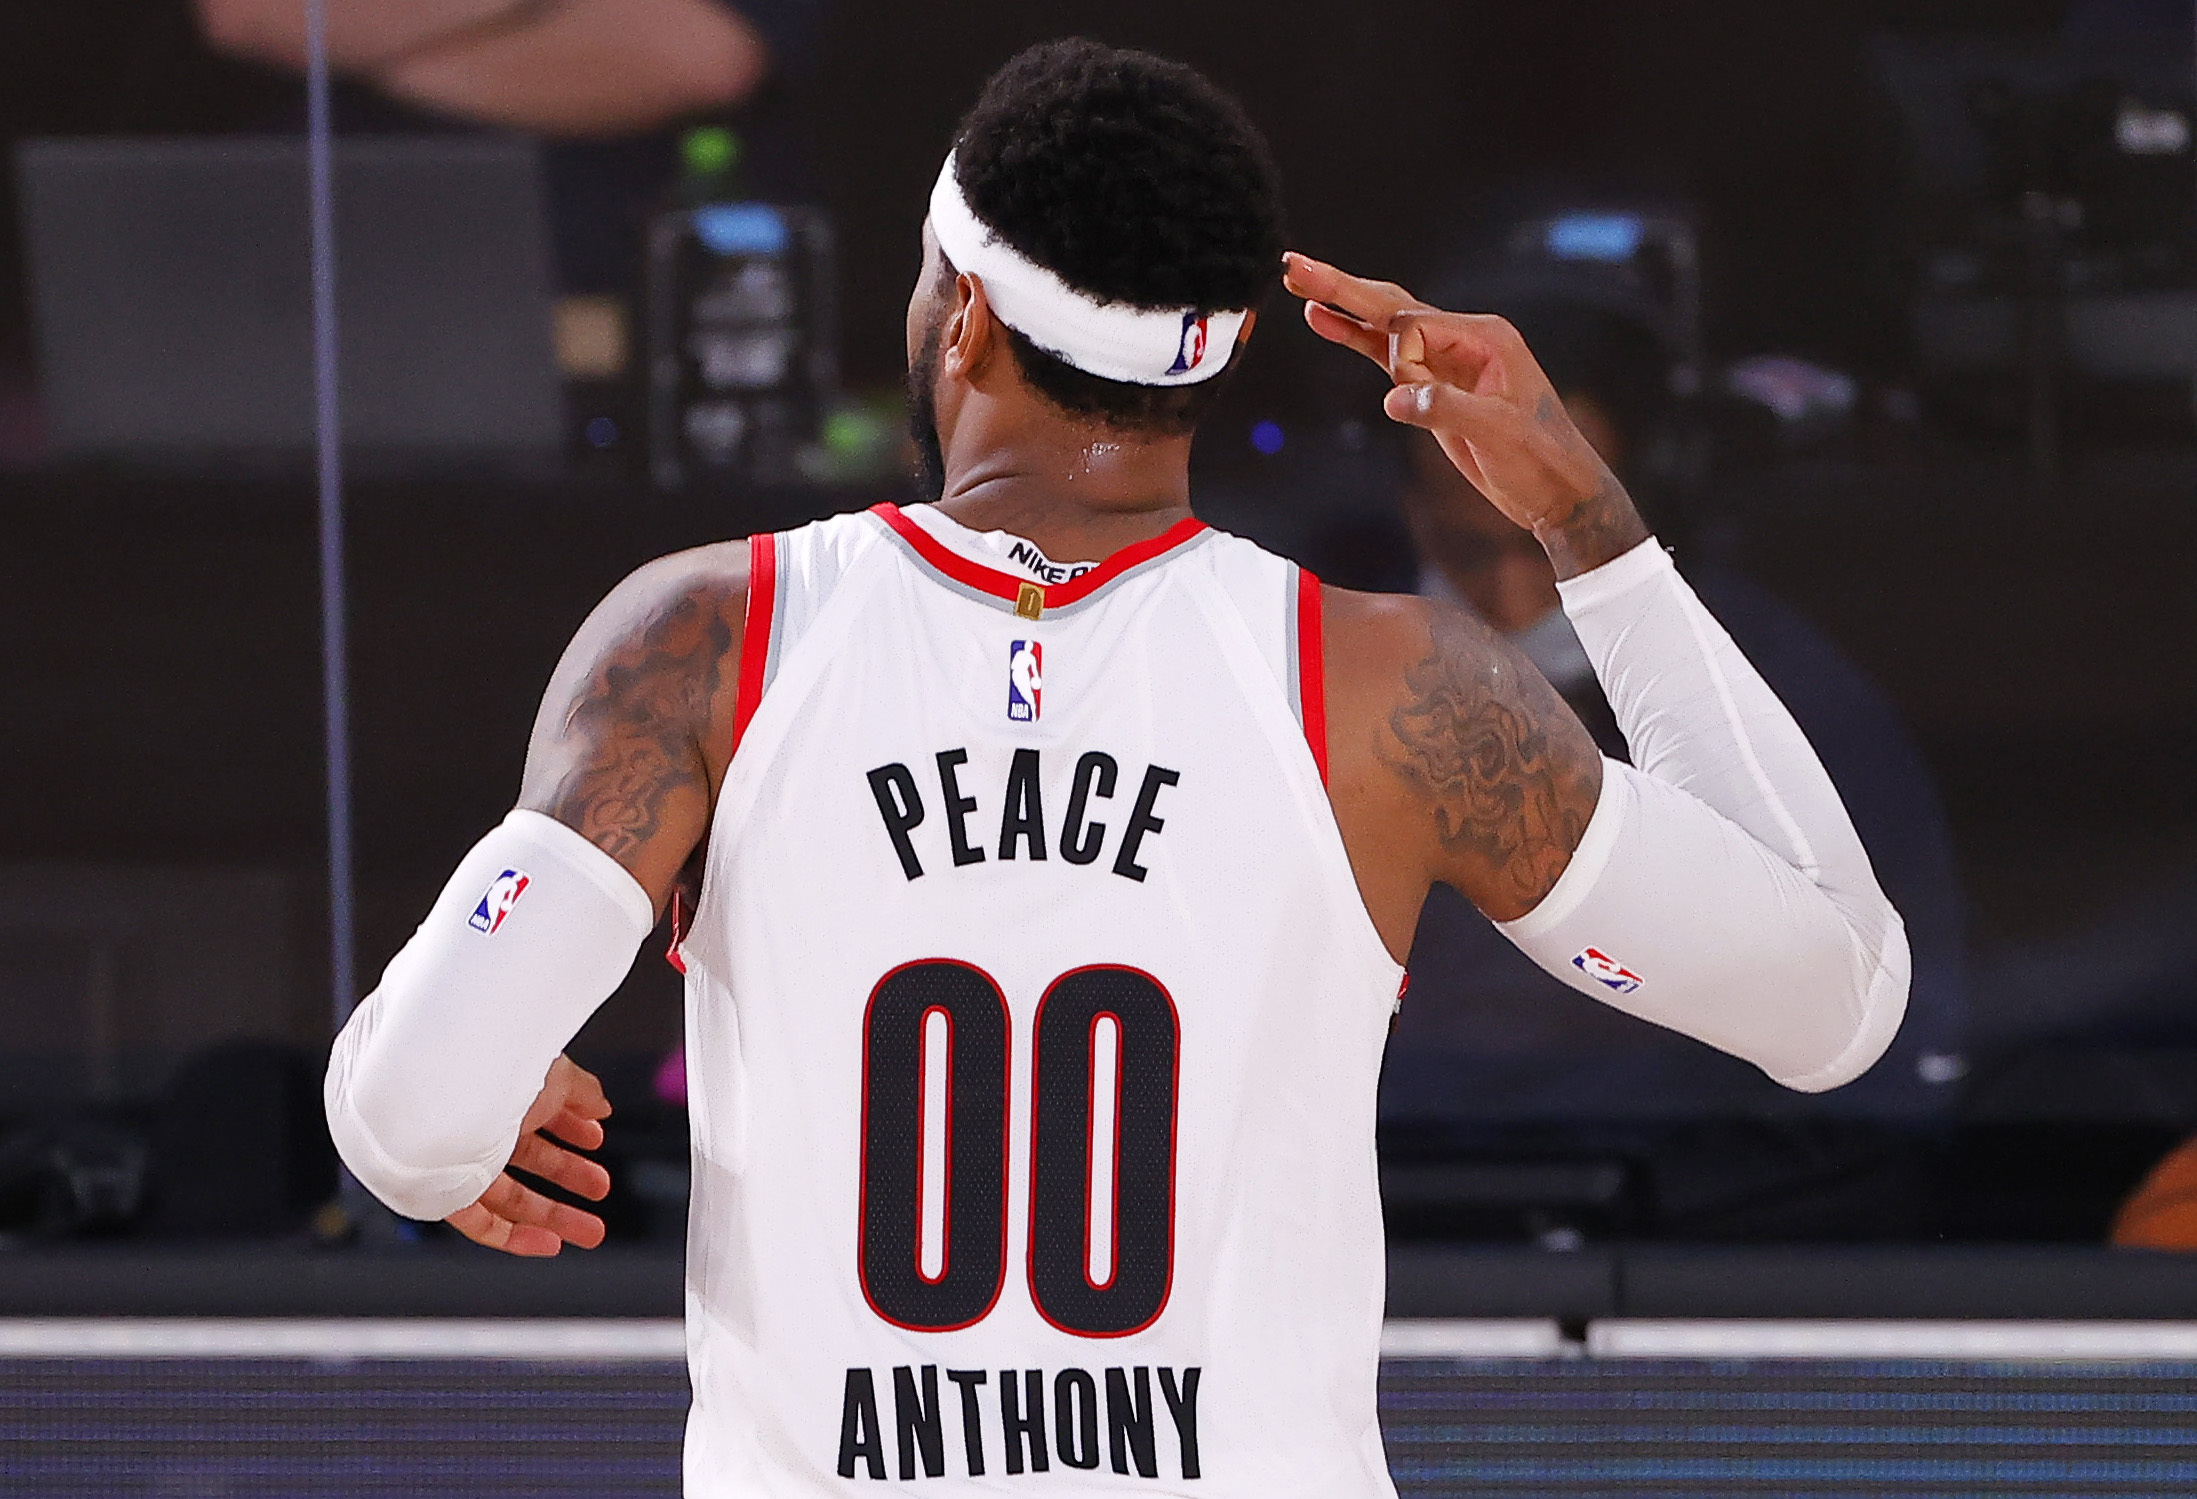 Carmelo Anthony surpasses LeBron in NBA jersey sales